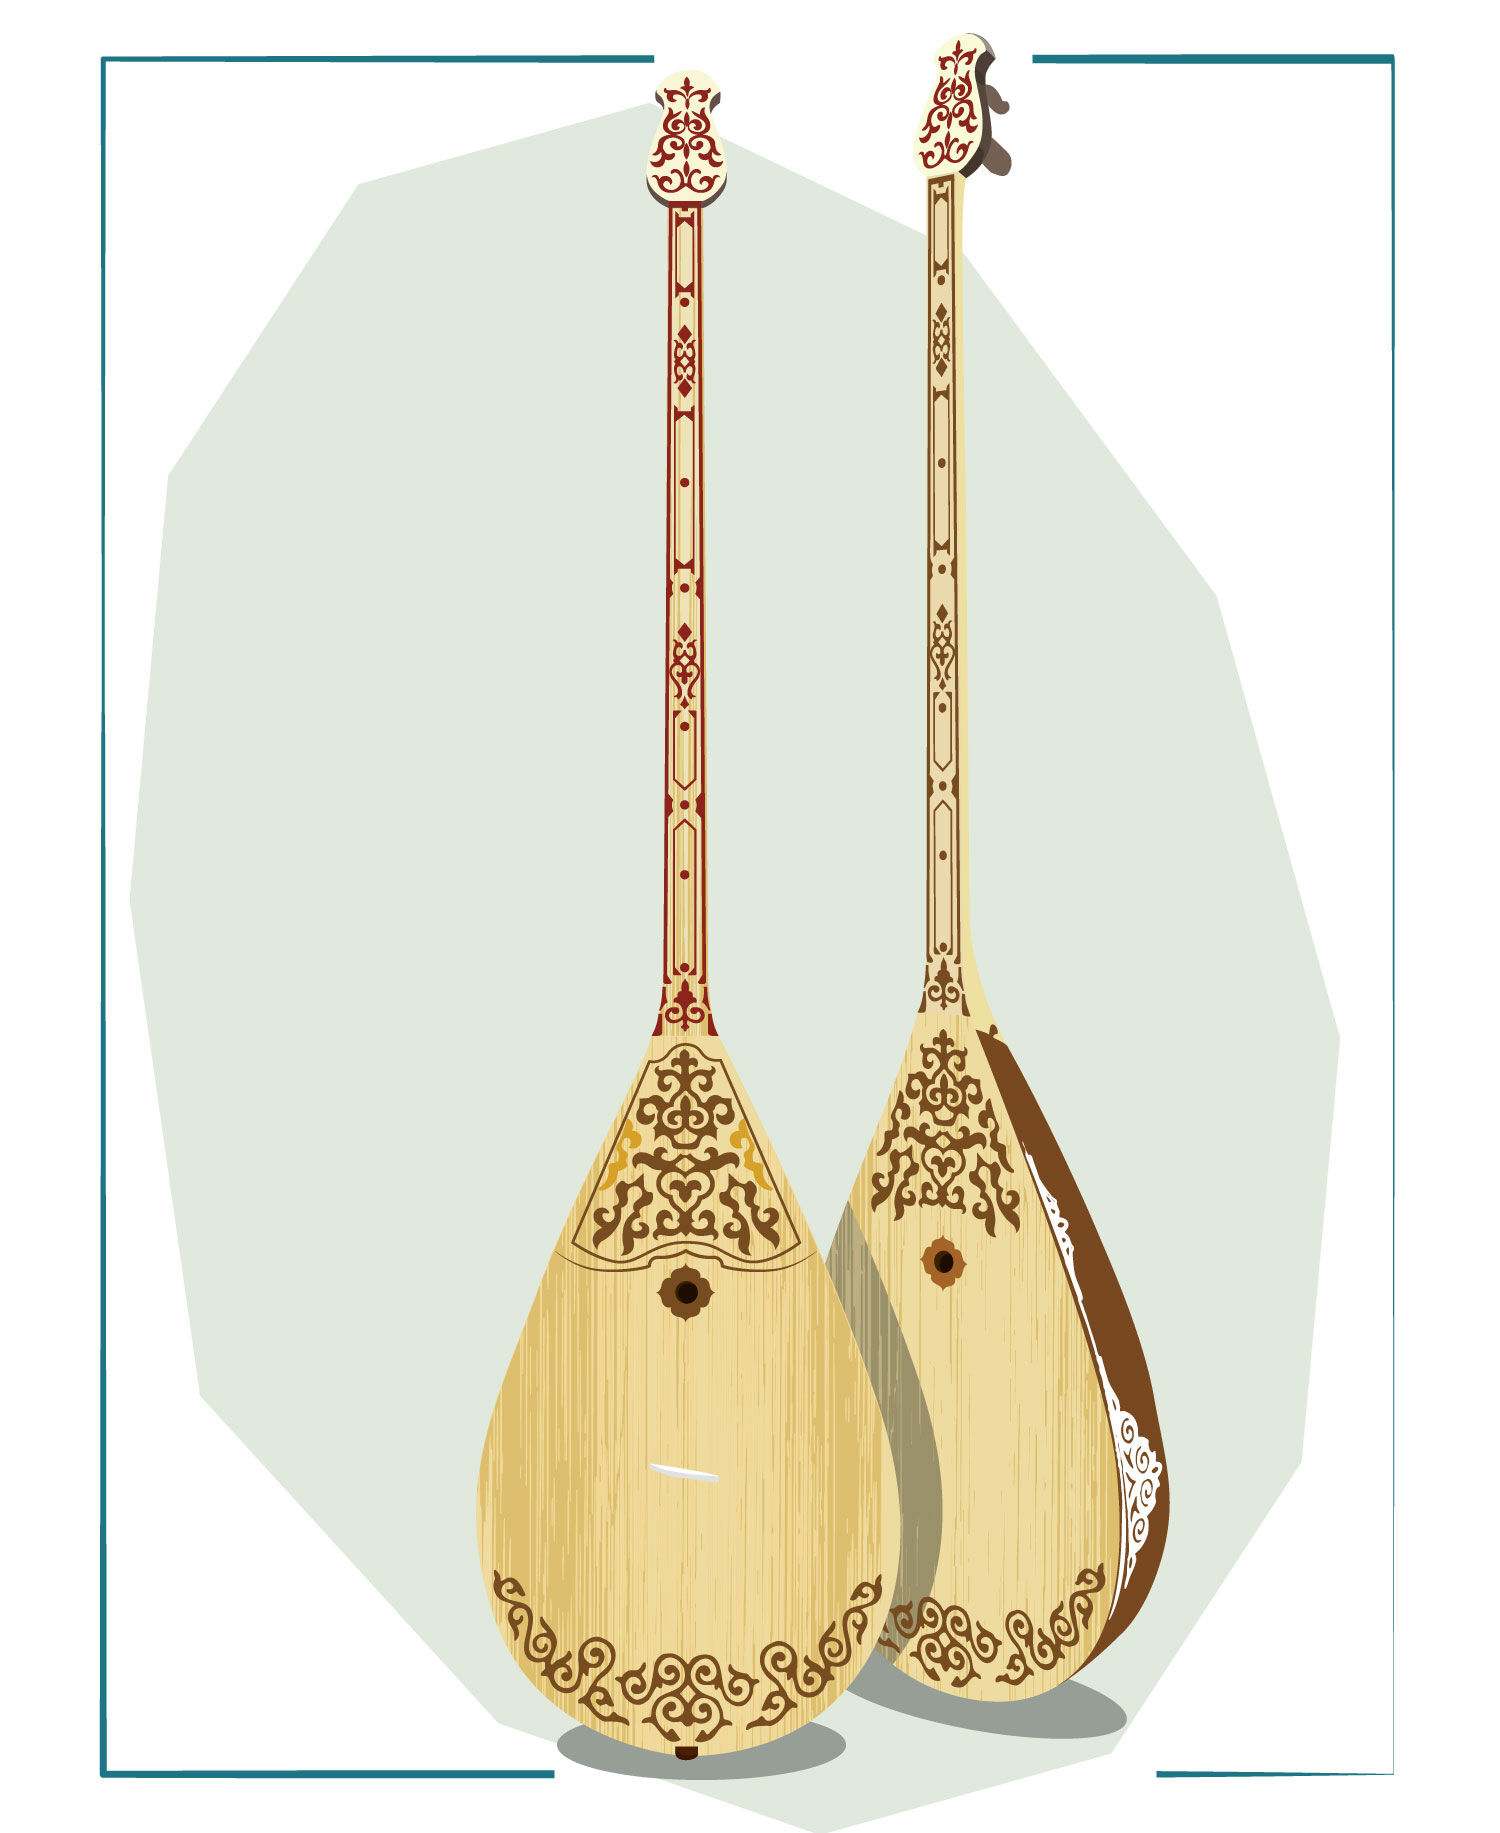 Dombra, also Dombyra, is a stringed plucked musical instrument By  DrawDreamer